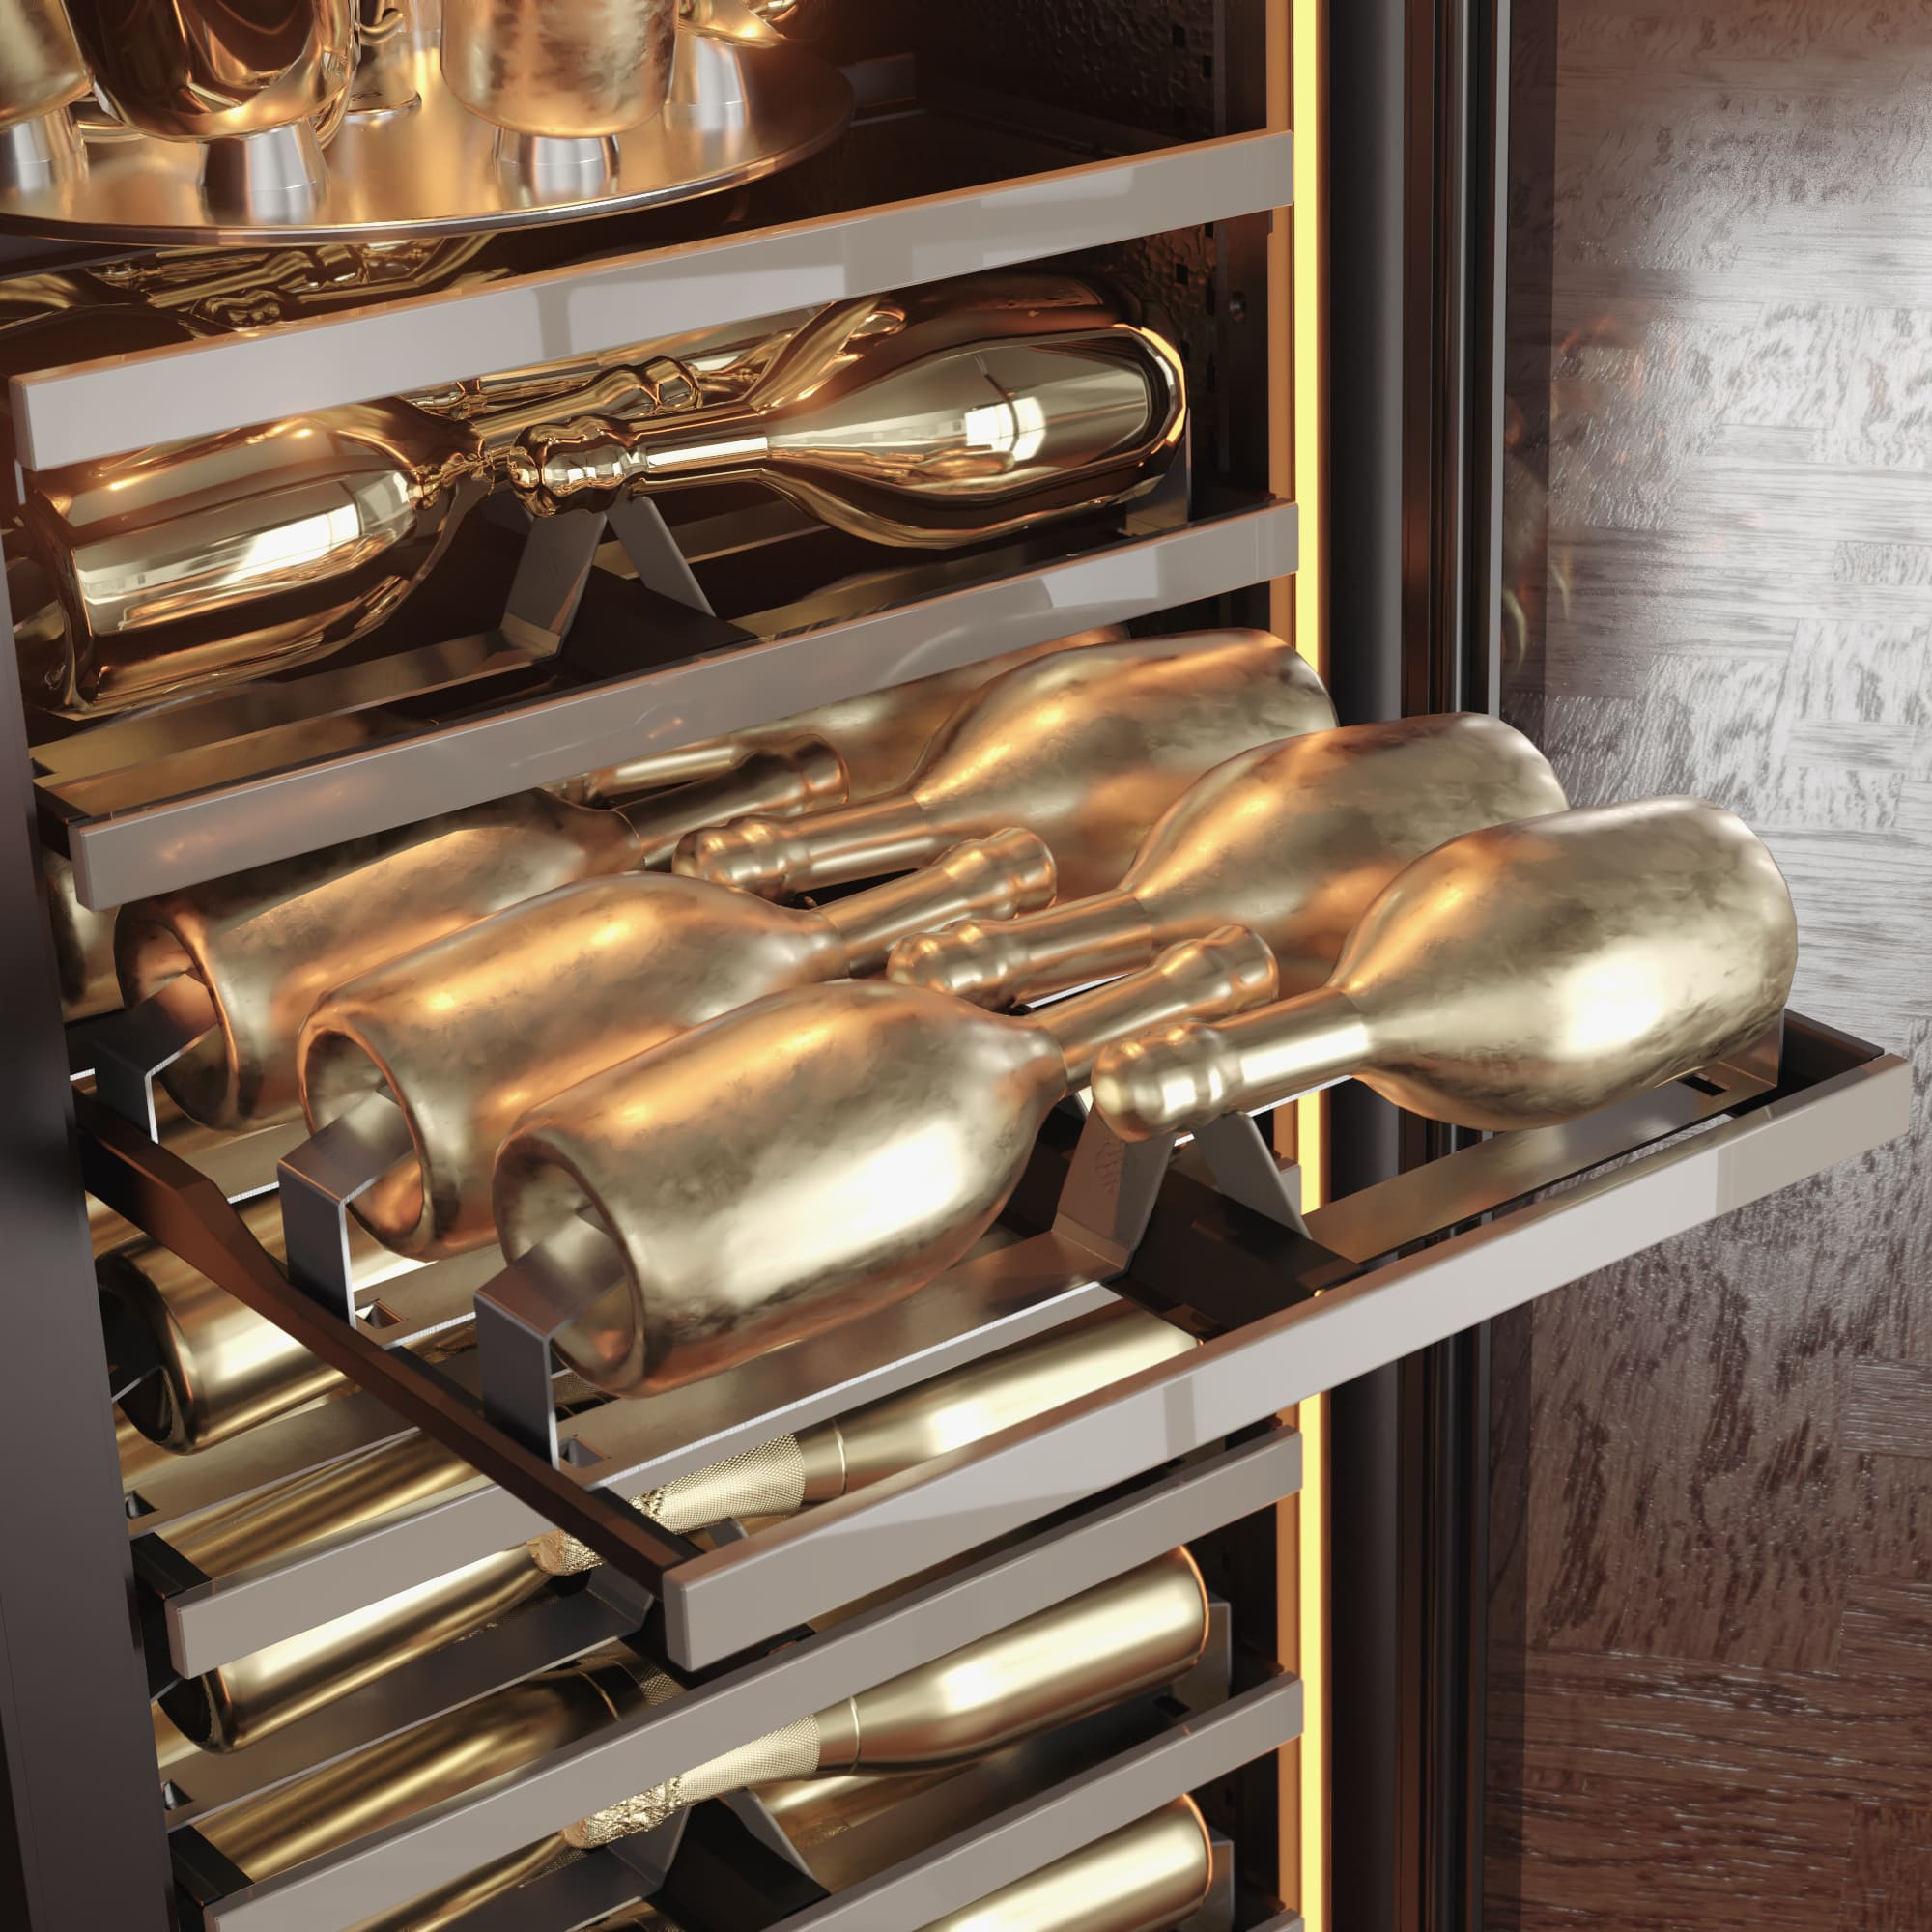 A shelf on slides with supports specially designed for holding champagne bottles. - eurocave champagne cooler